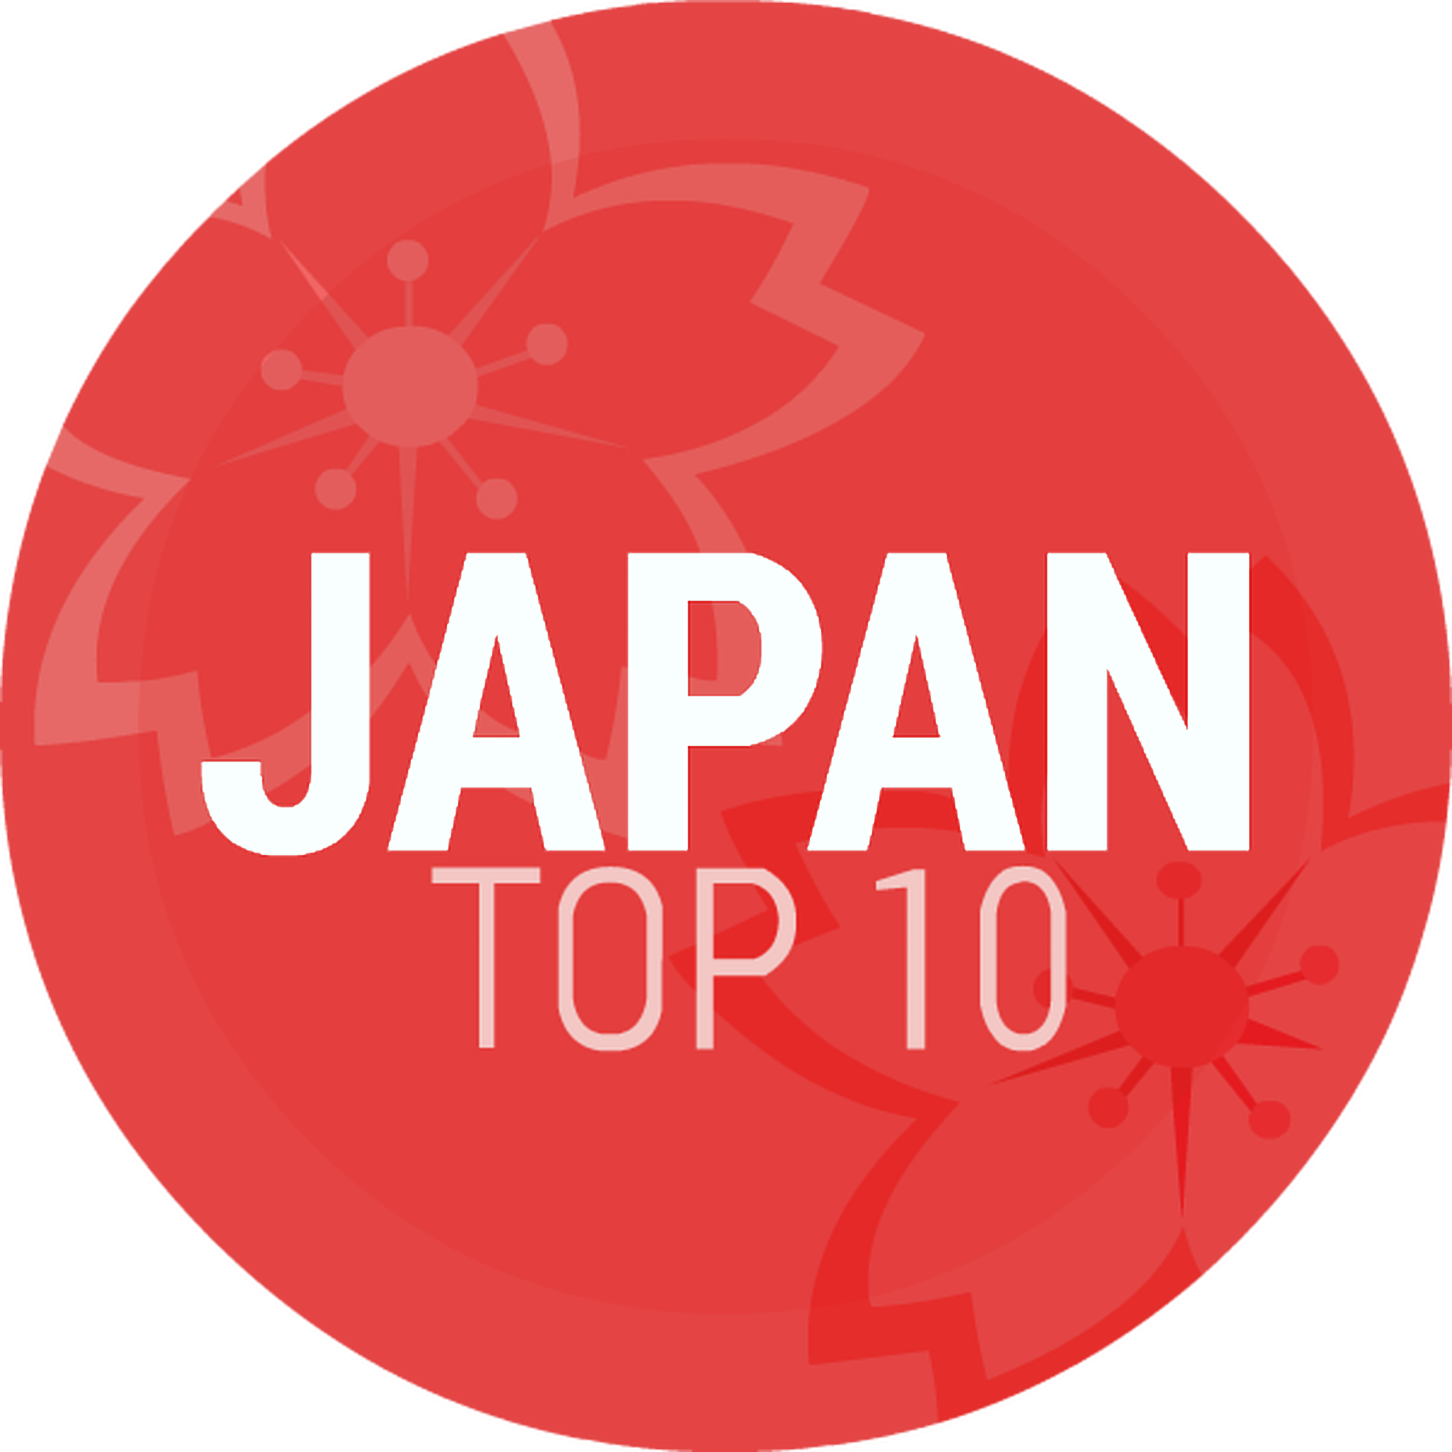 Episode 60: Japan Top 10 Mid/Late December 2014 Countdown